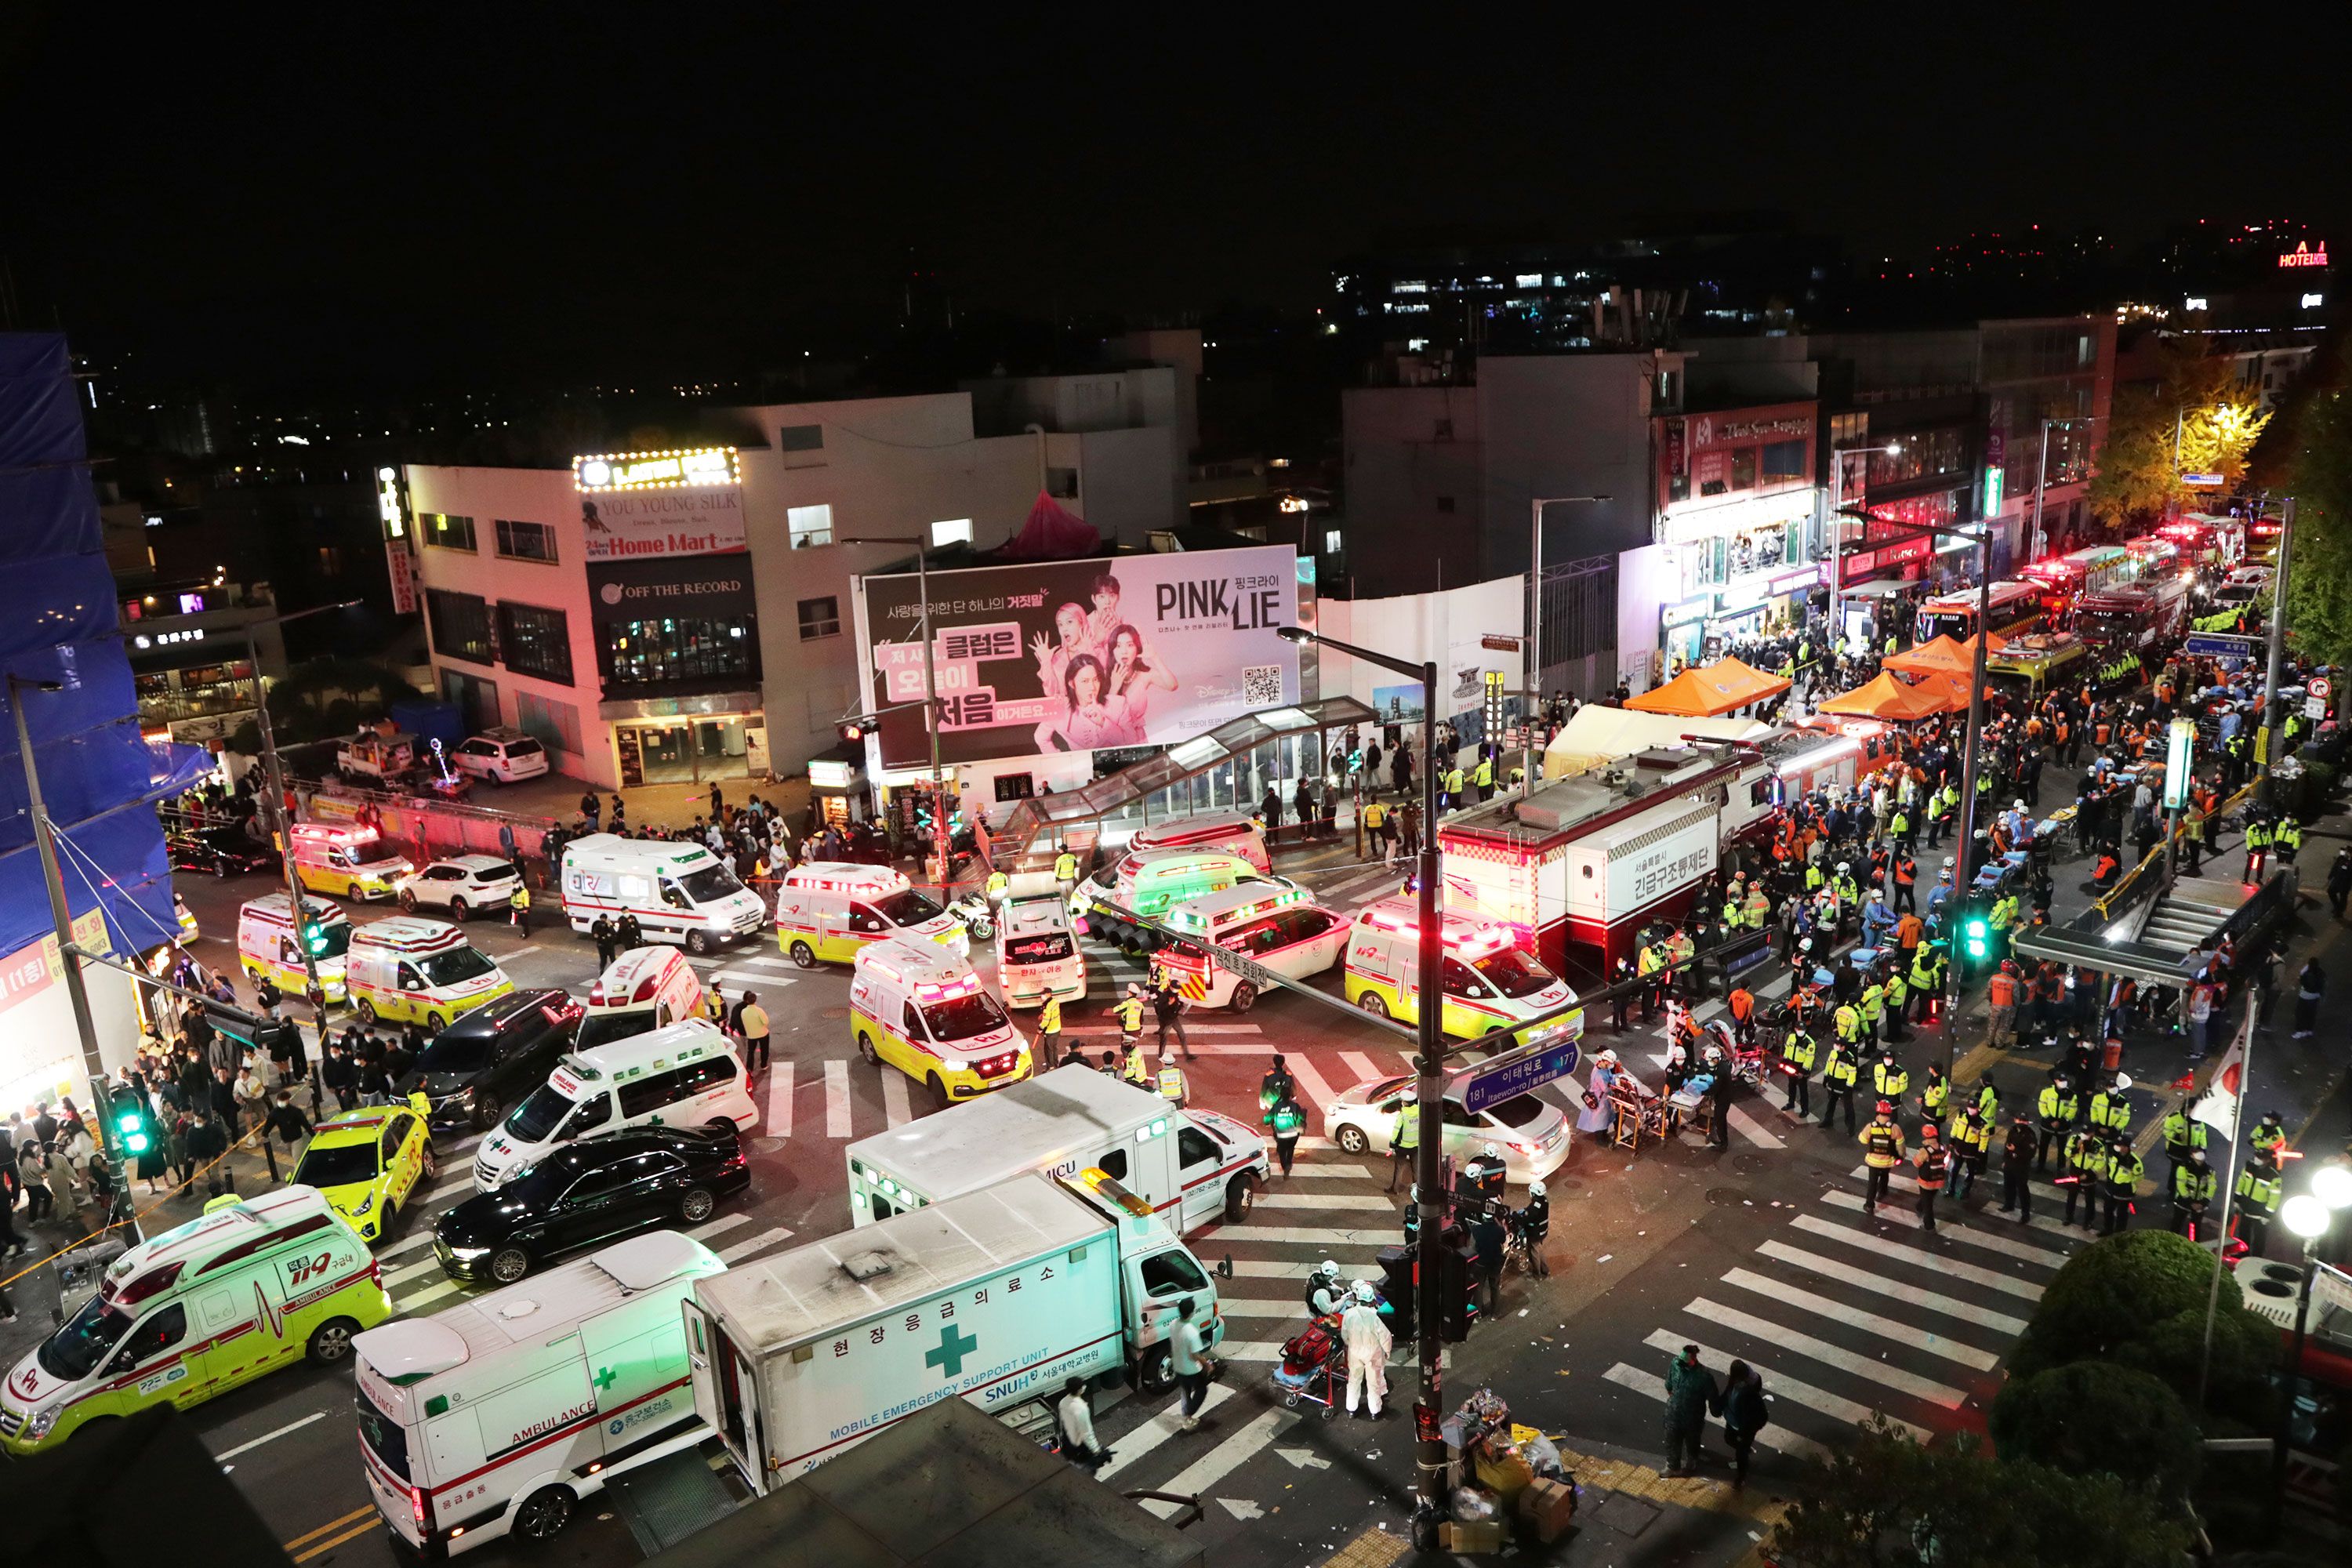 Seoul's Nightlife District Was Built for Tragedy